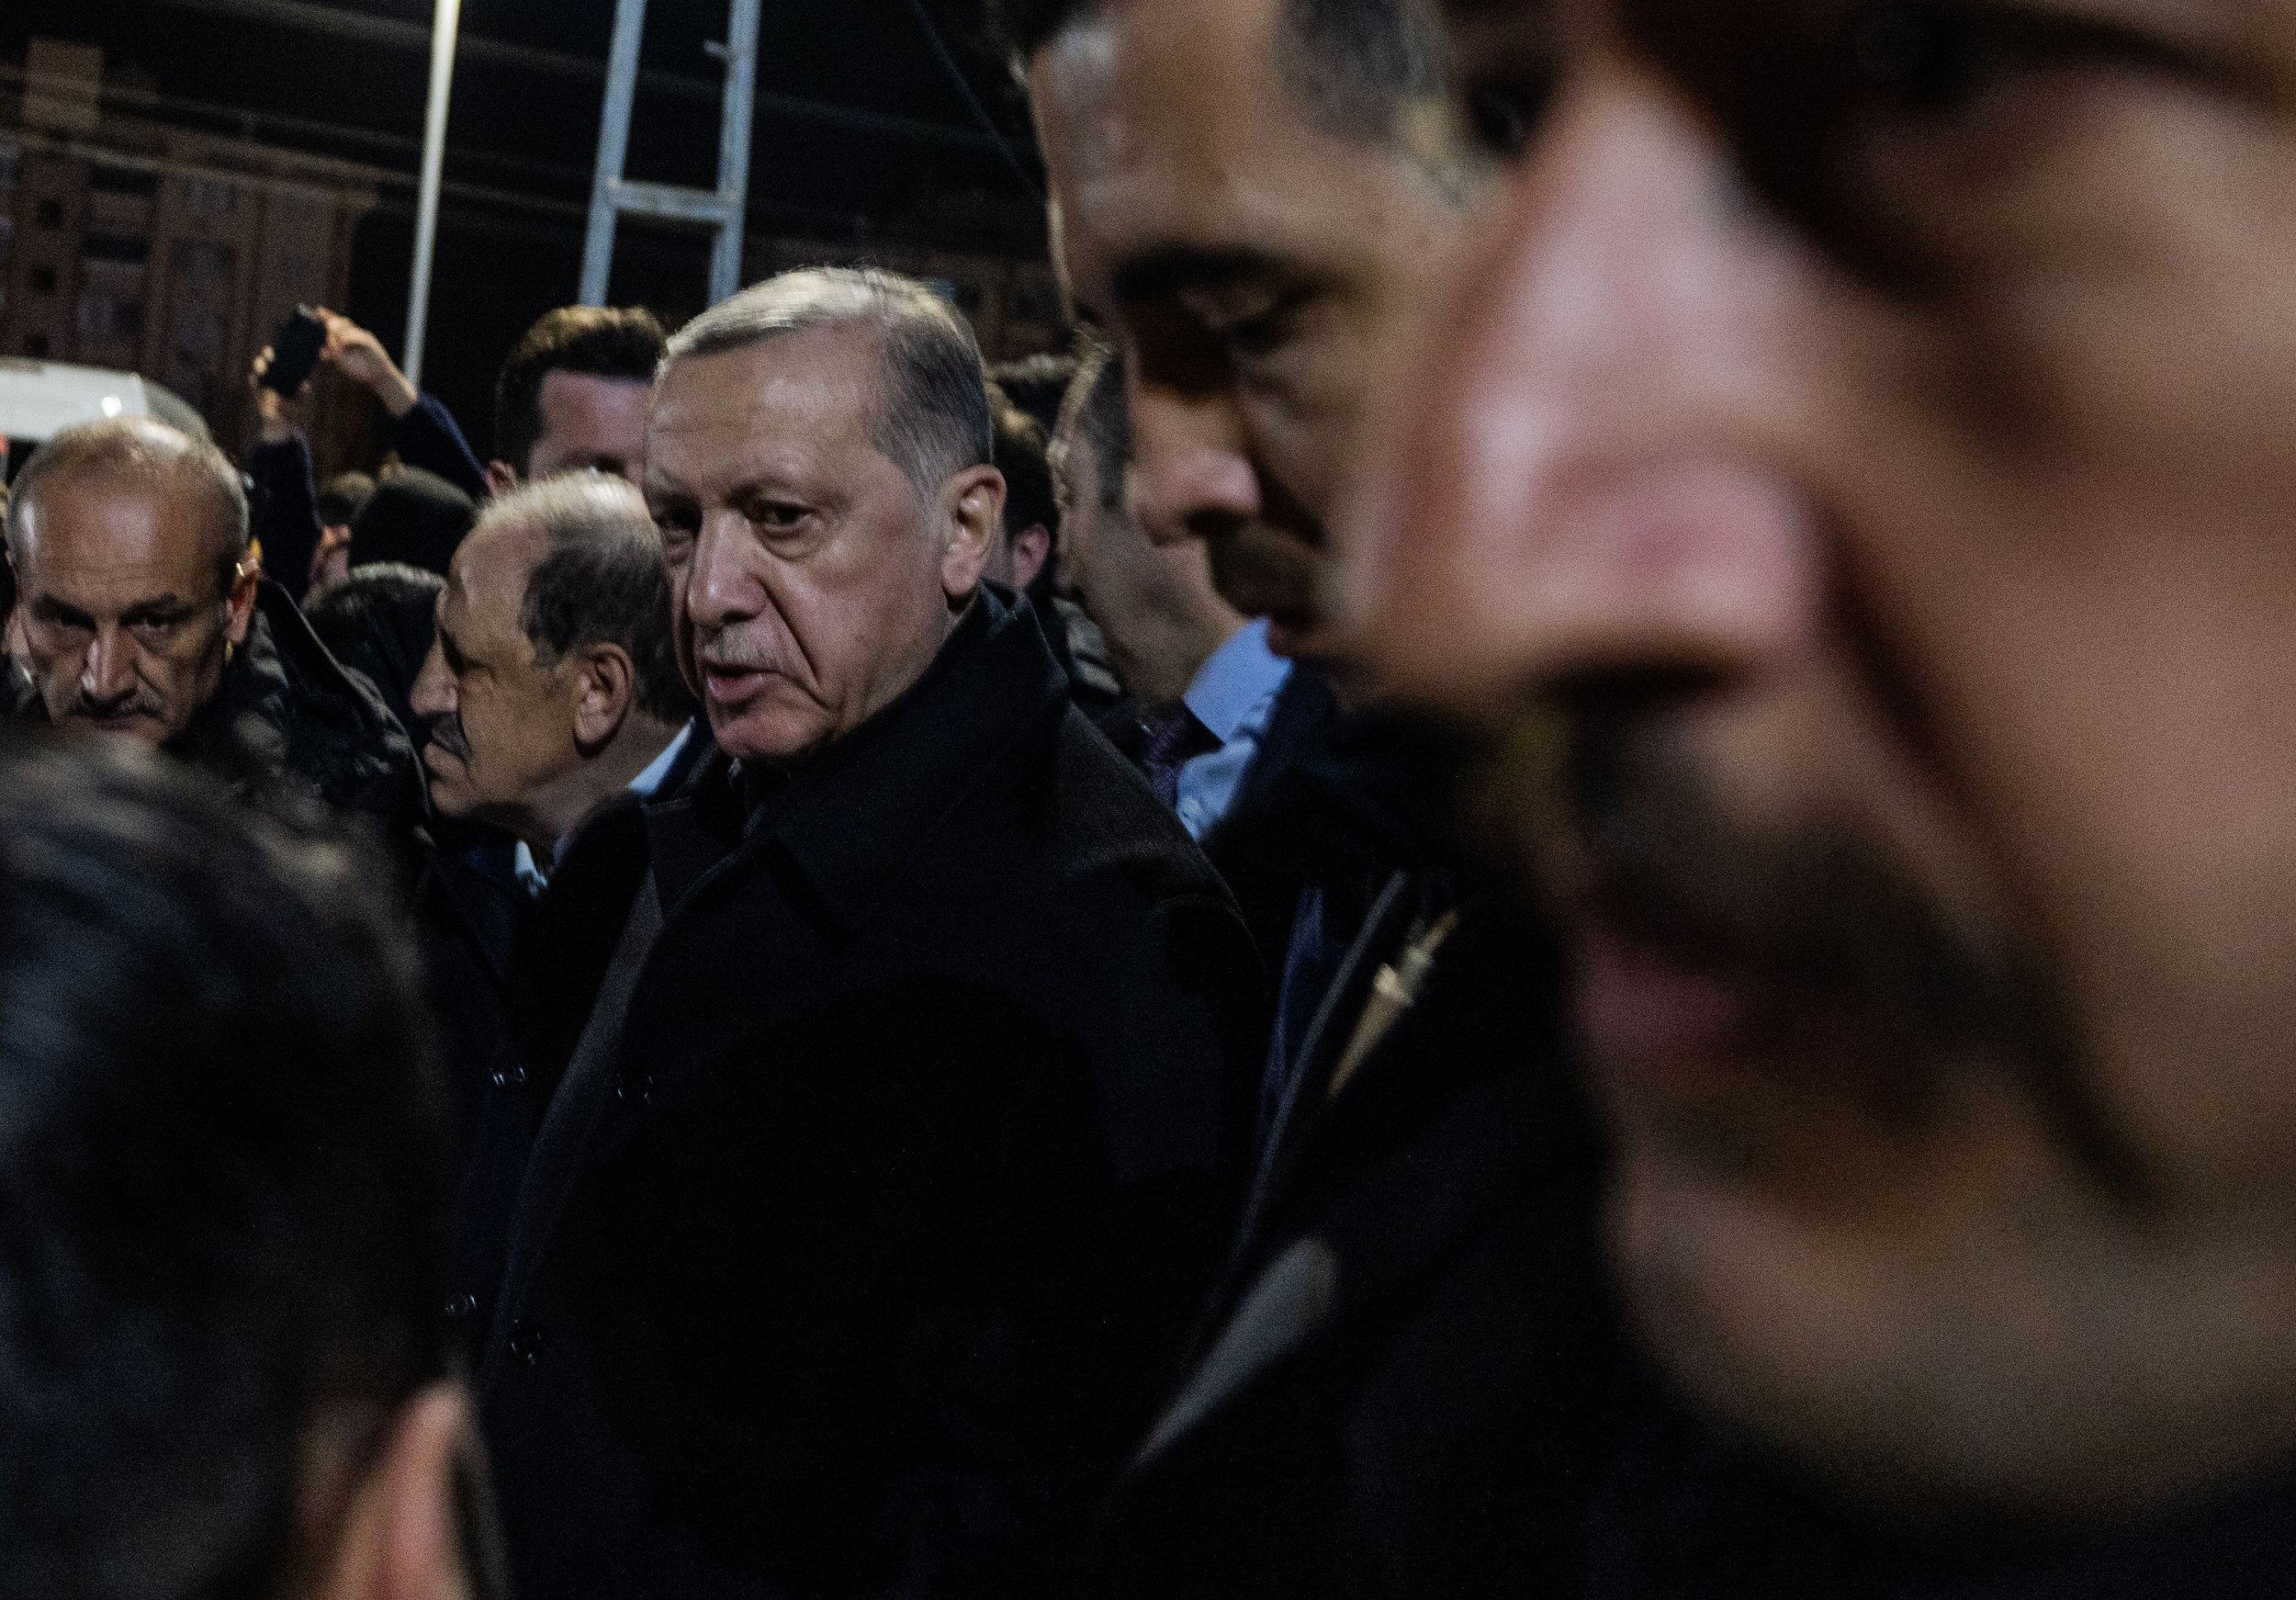  Turkish President, Tayyip Erdogan, attends a publicity event in Hatay, Turkey on February 21, 2023. The stunt was meant to quiet outrage about the governmental response to the recent deadly earthquakes and restore public opinion before the president